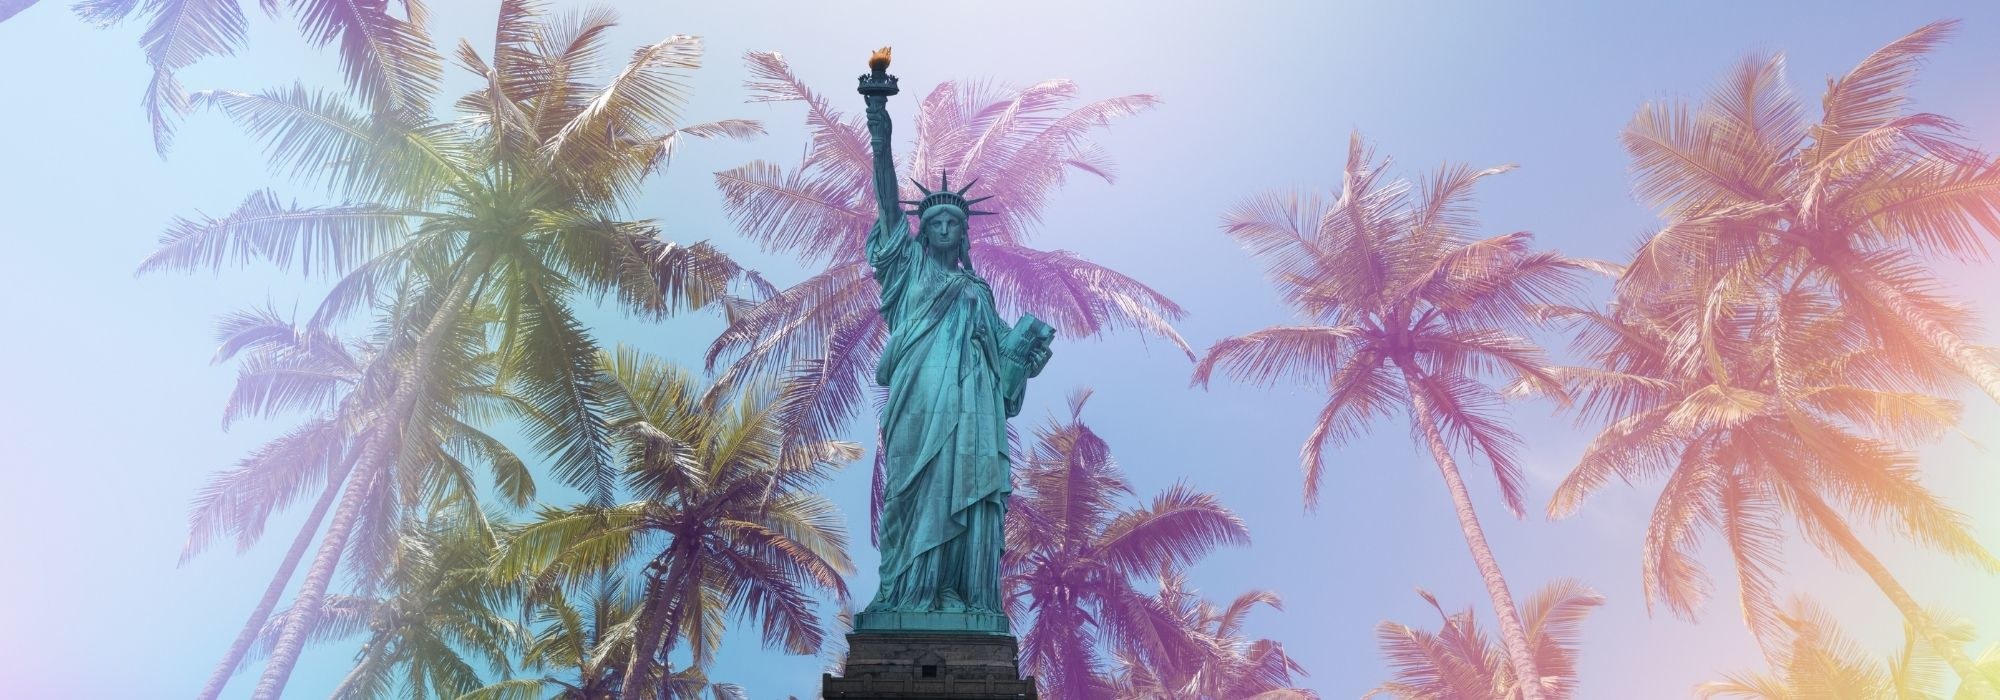 Statue of Liberty with palm trees, now lifting south florida